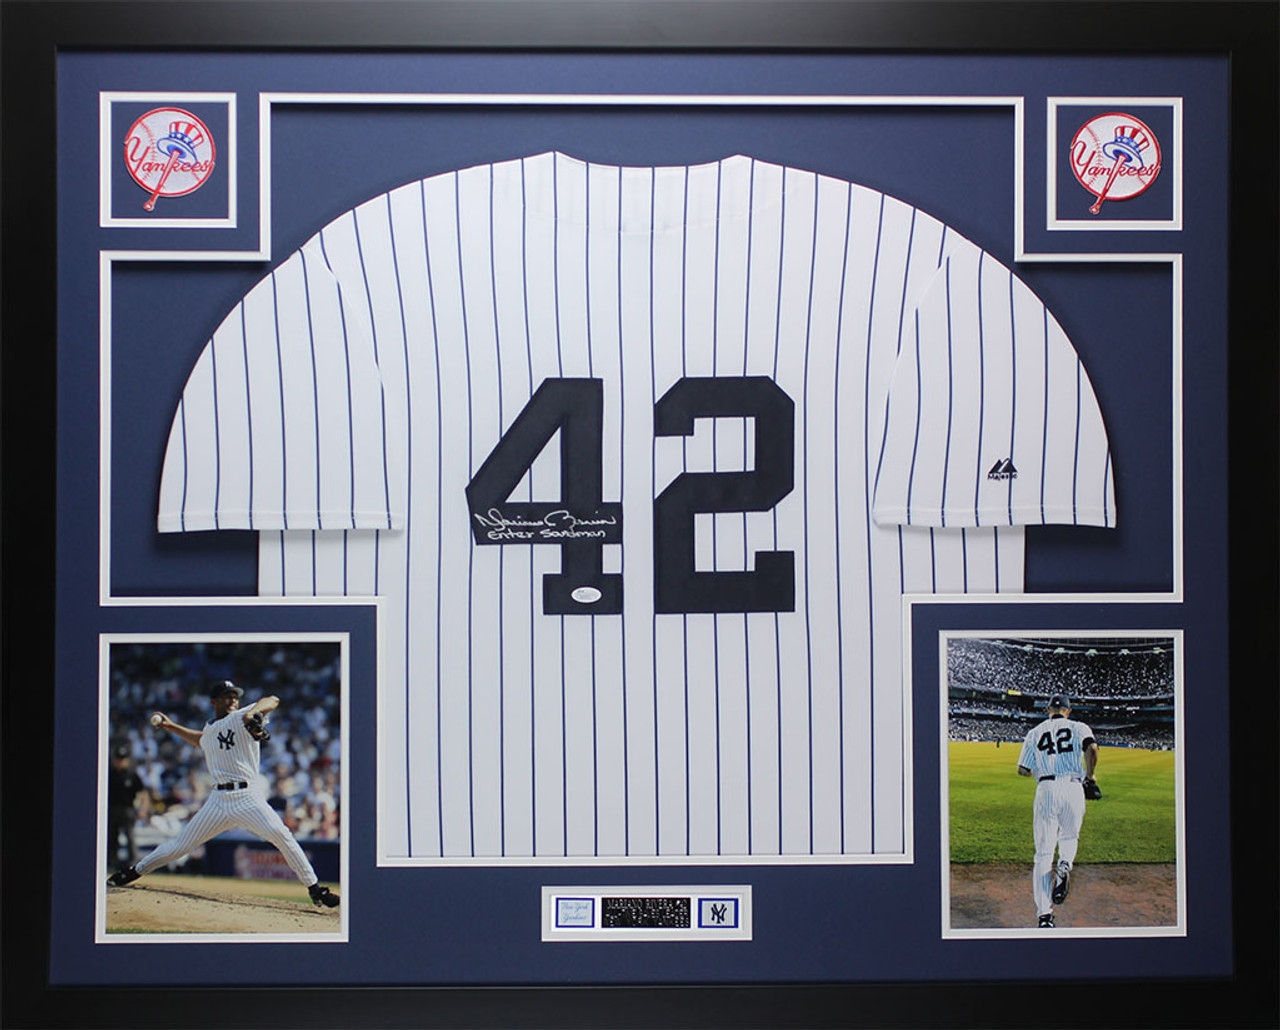 Mariano Rivera Autographed Framed Yankees Jersey - The Stadium Studio